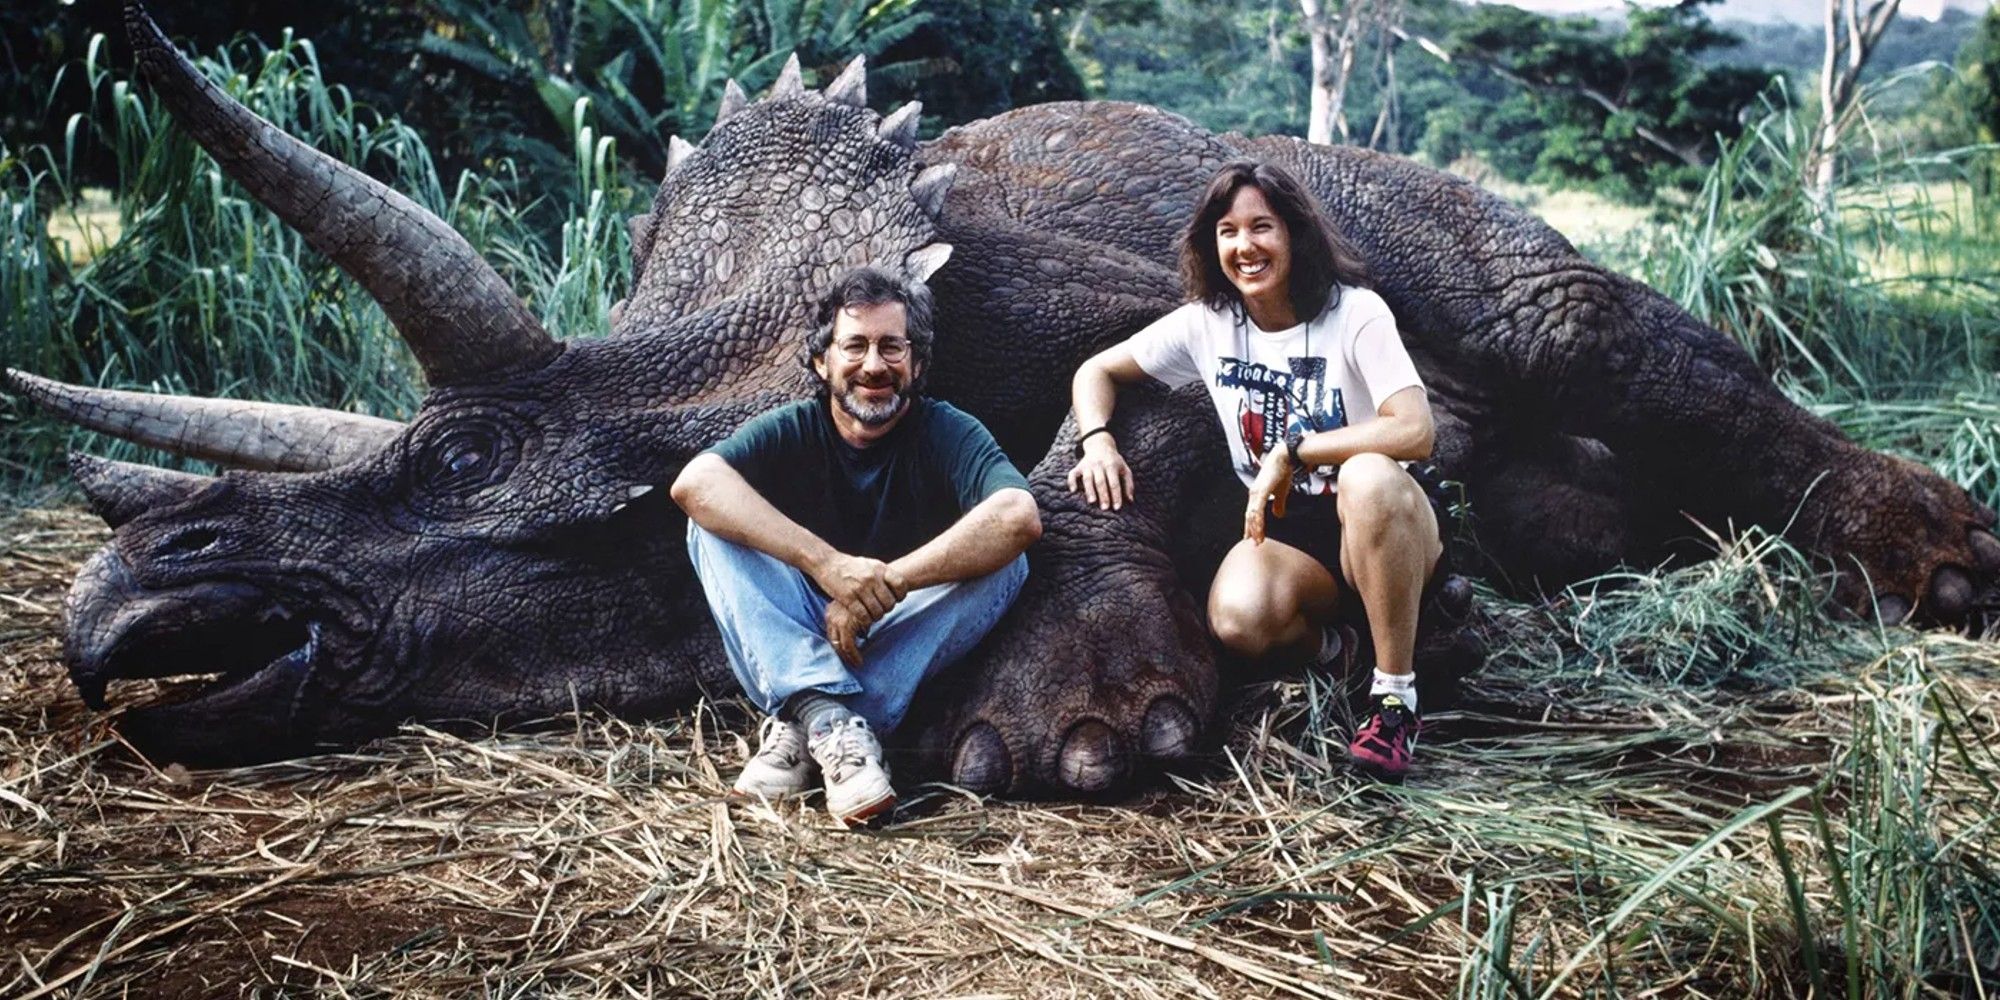 Jurassic Park Behind The Scenes Steven Spielberg and Kathleen Kennedy with the Triceretops prop